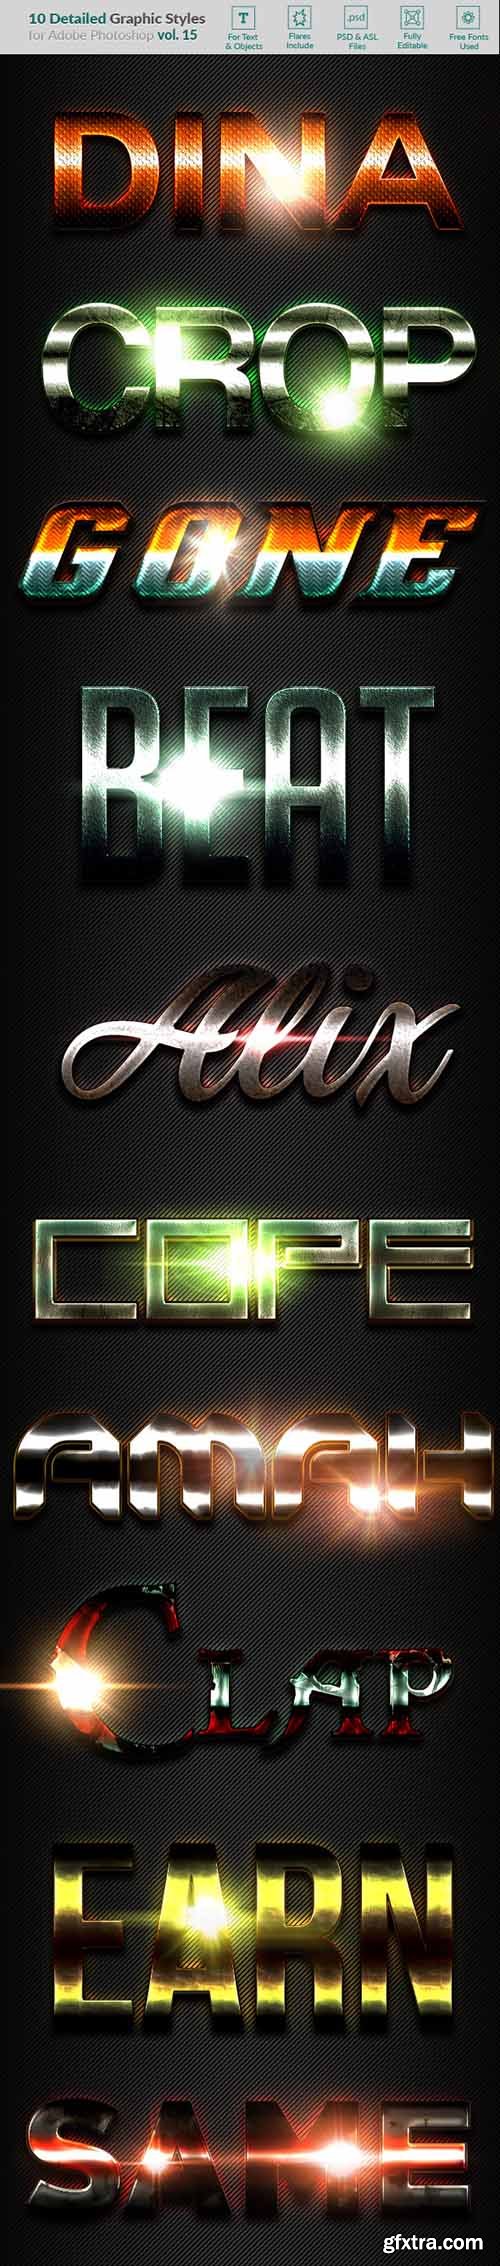 GraphicRiver - 10 Text Effects Vol 15 20903278